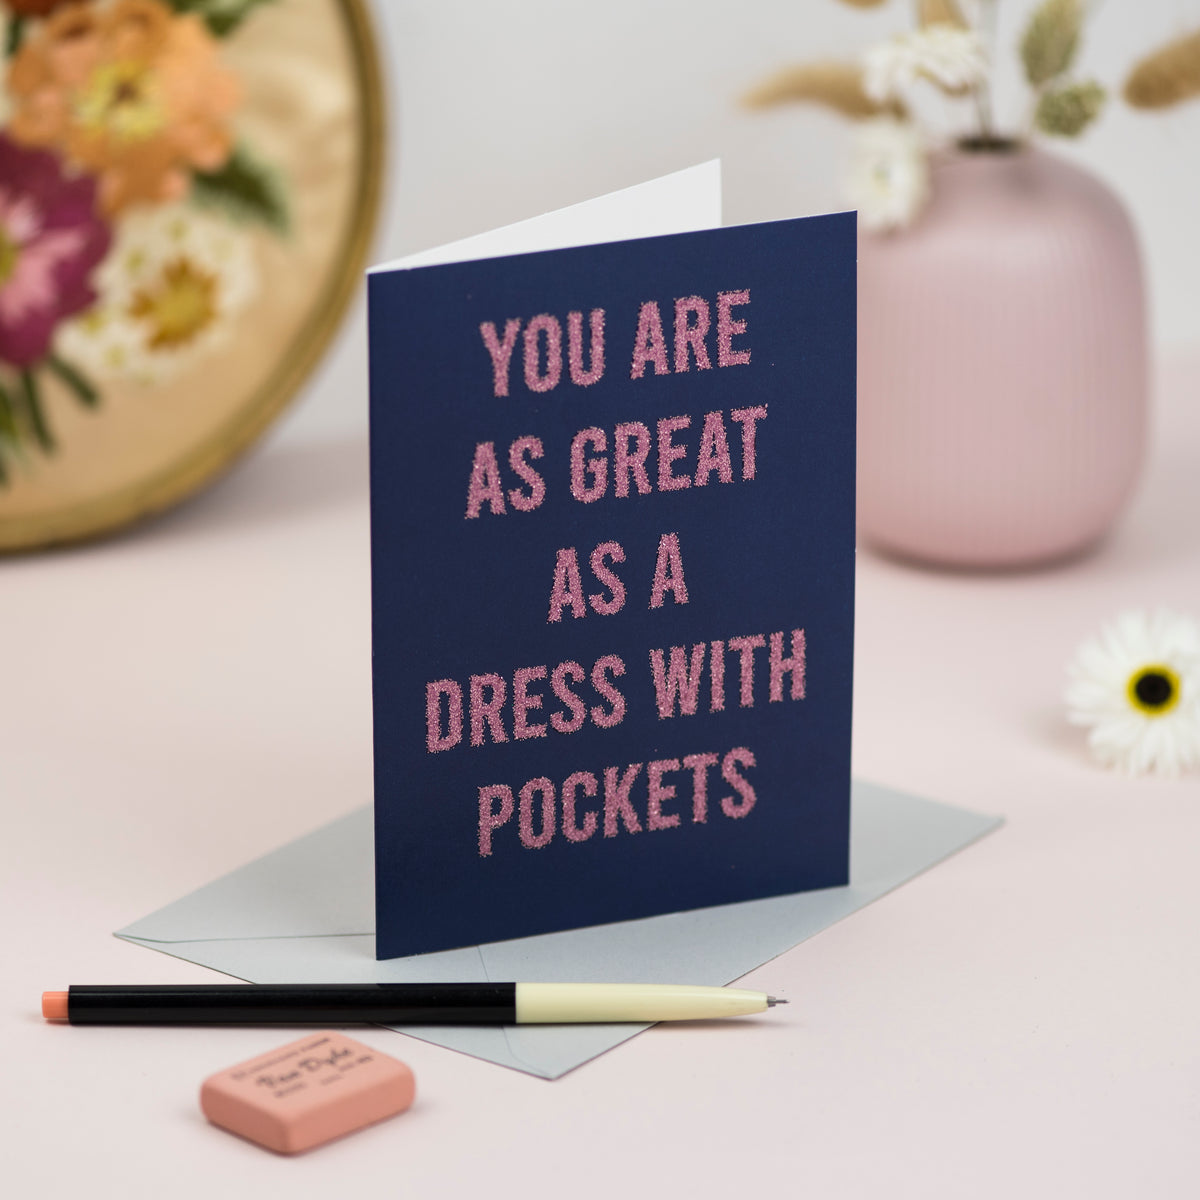 SALE 'You Are As Great As A Dress With Pockets' Greetings Card - Biodegradable Glitter